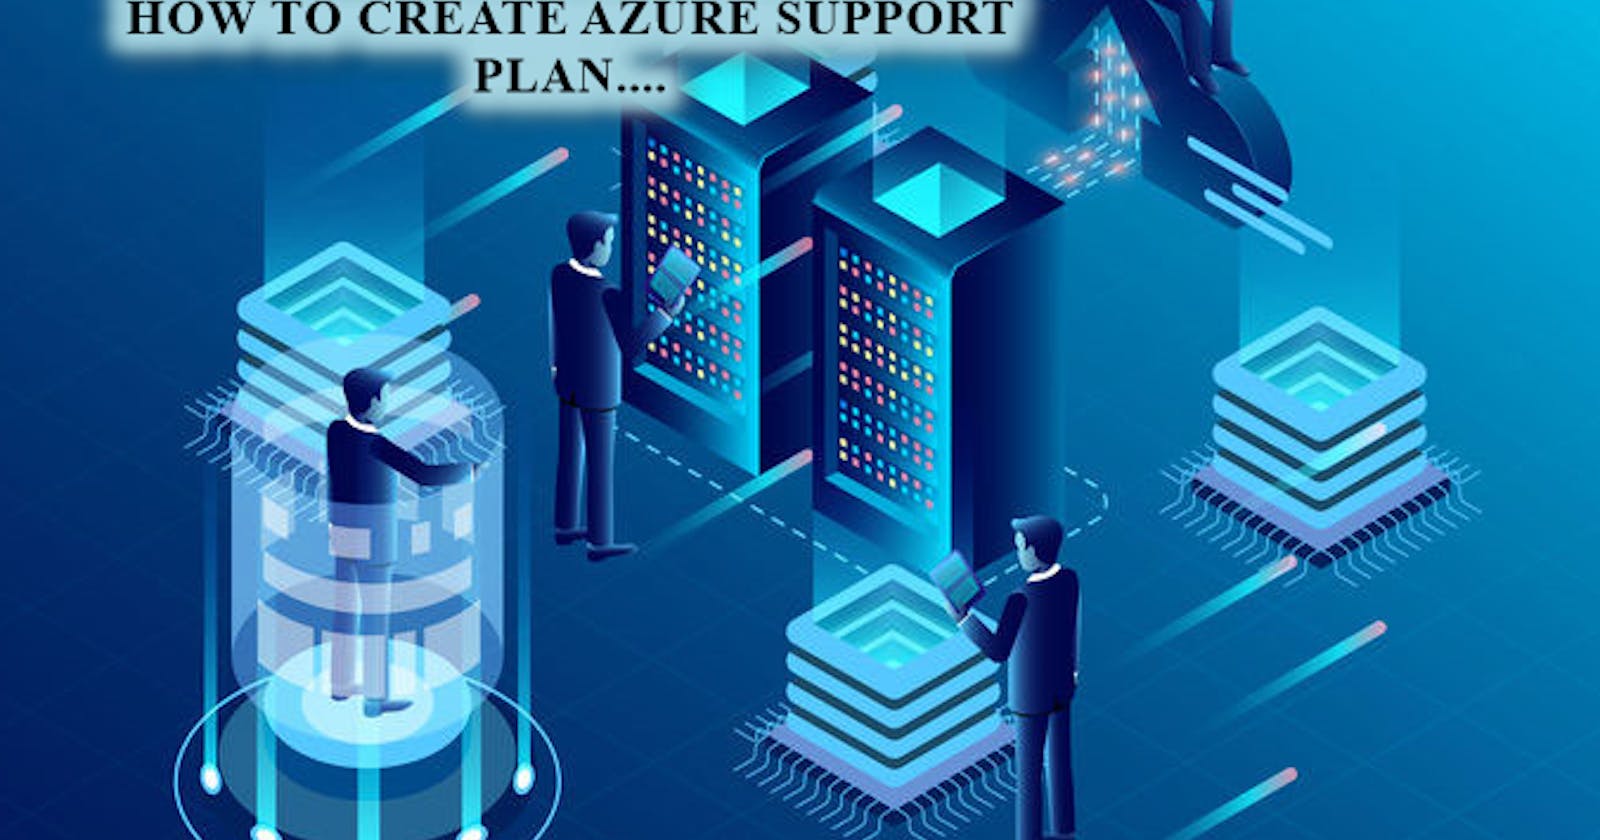 How To Create Azure Support Plan.